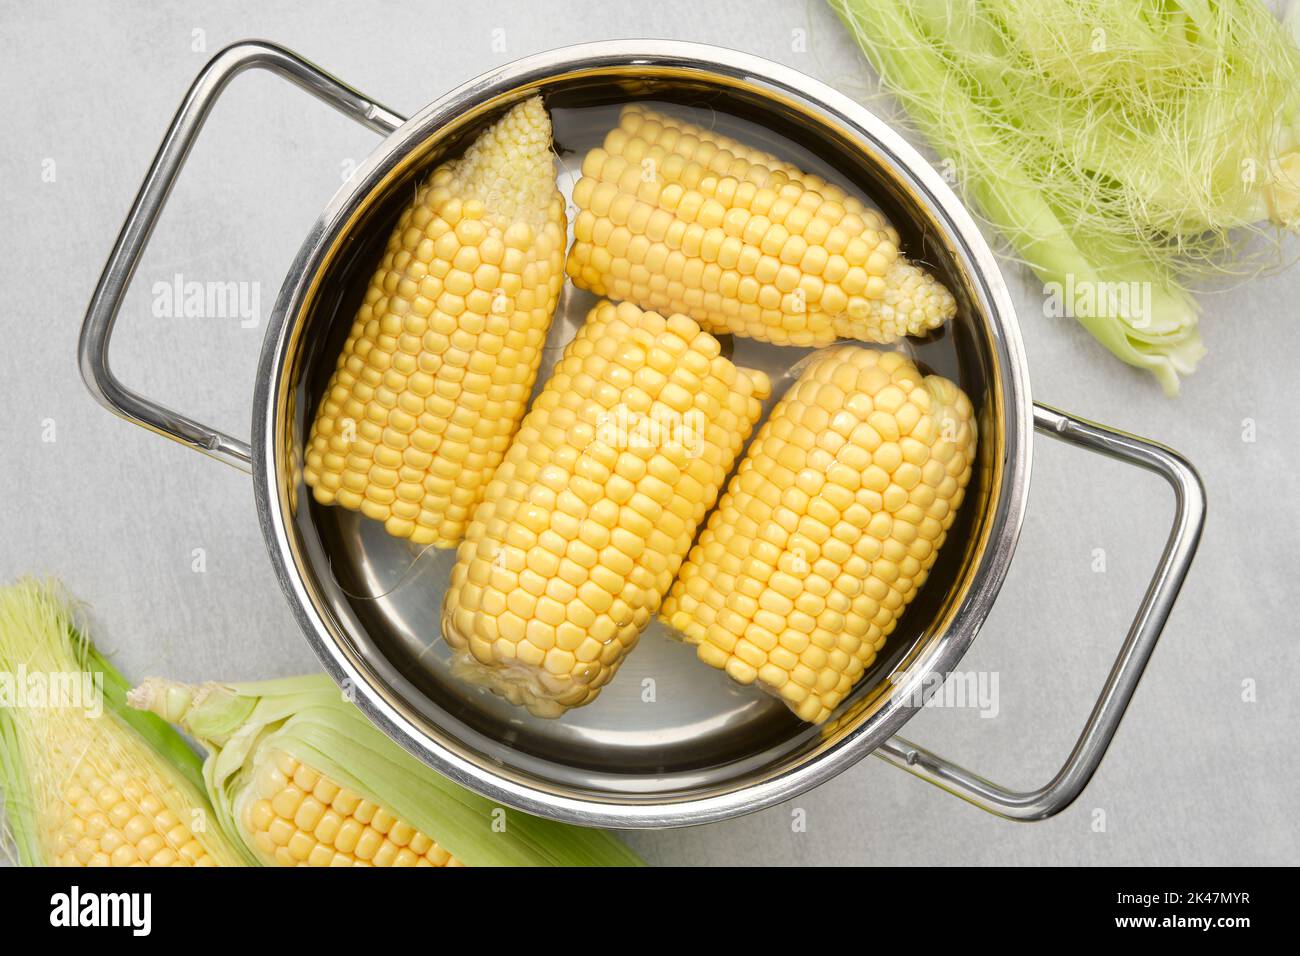 Cooking pot of yellow sweet corn cobs prepared for boiling, raw corncobs for cooking on kitchen table, top view. Stock Photo